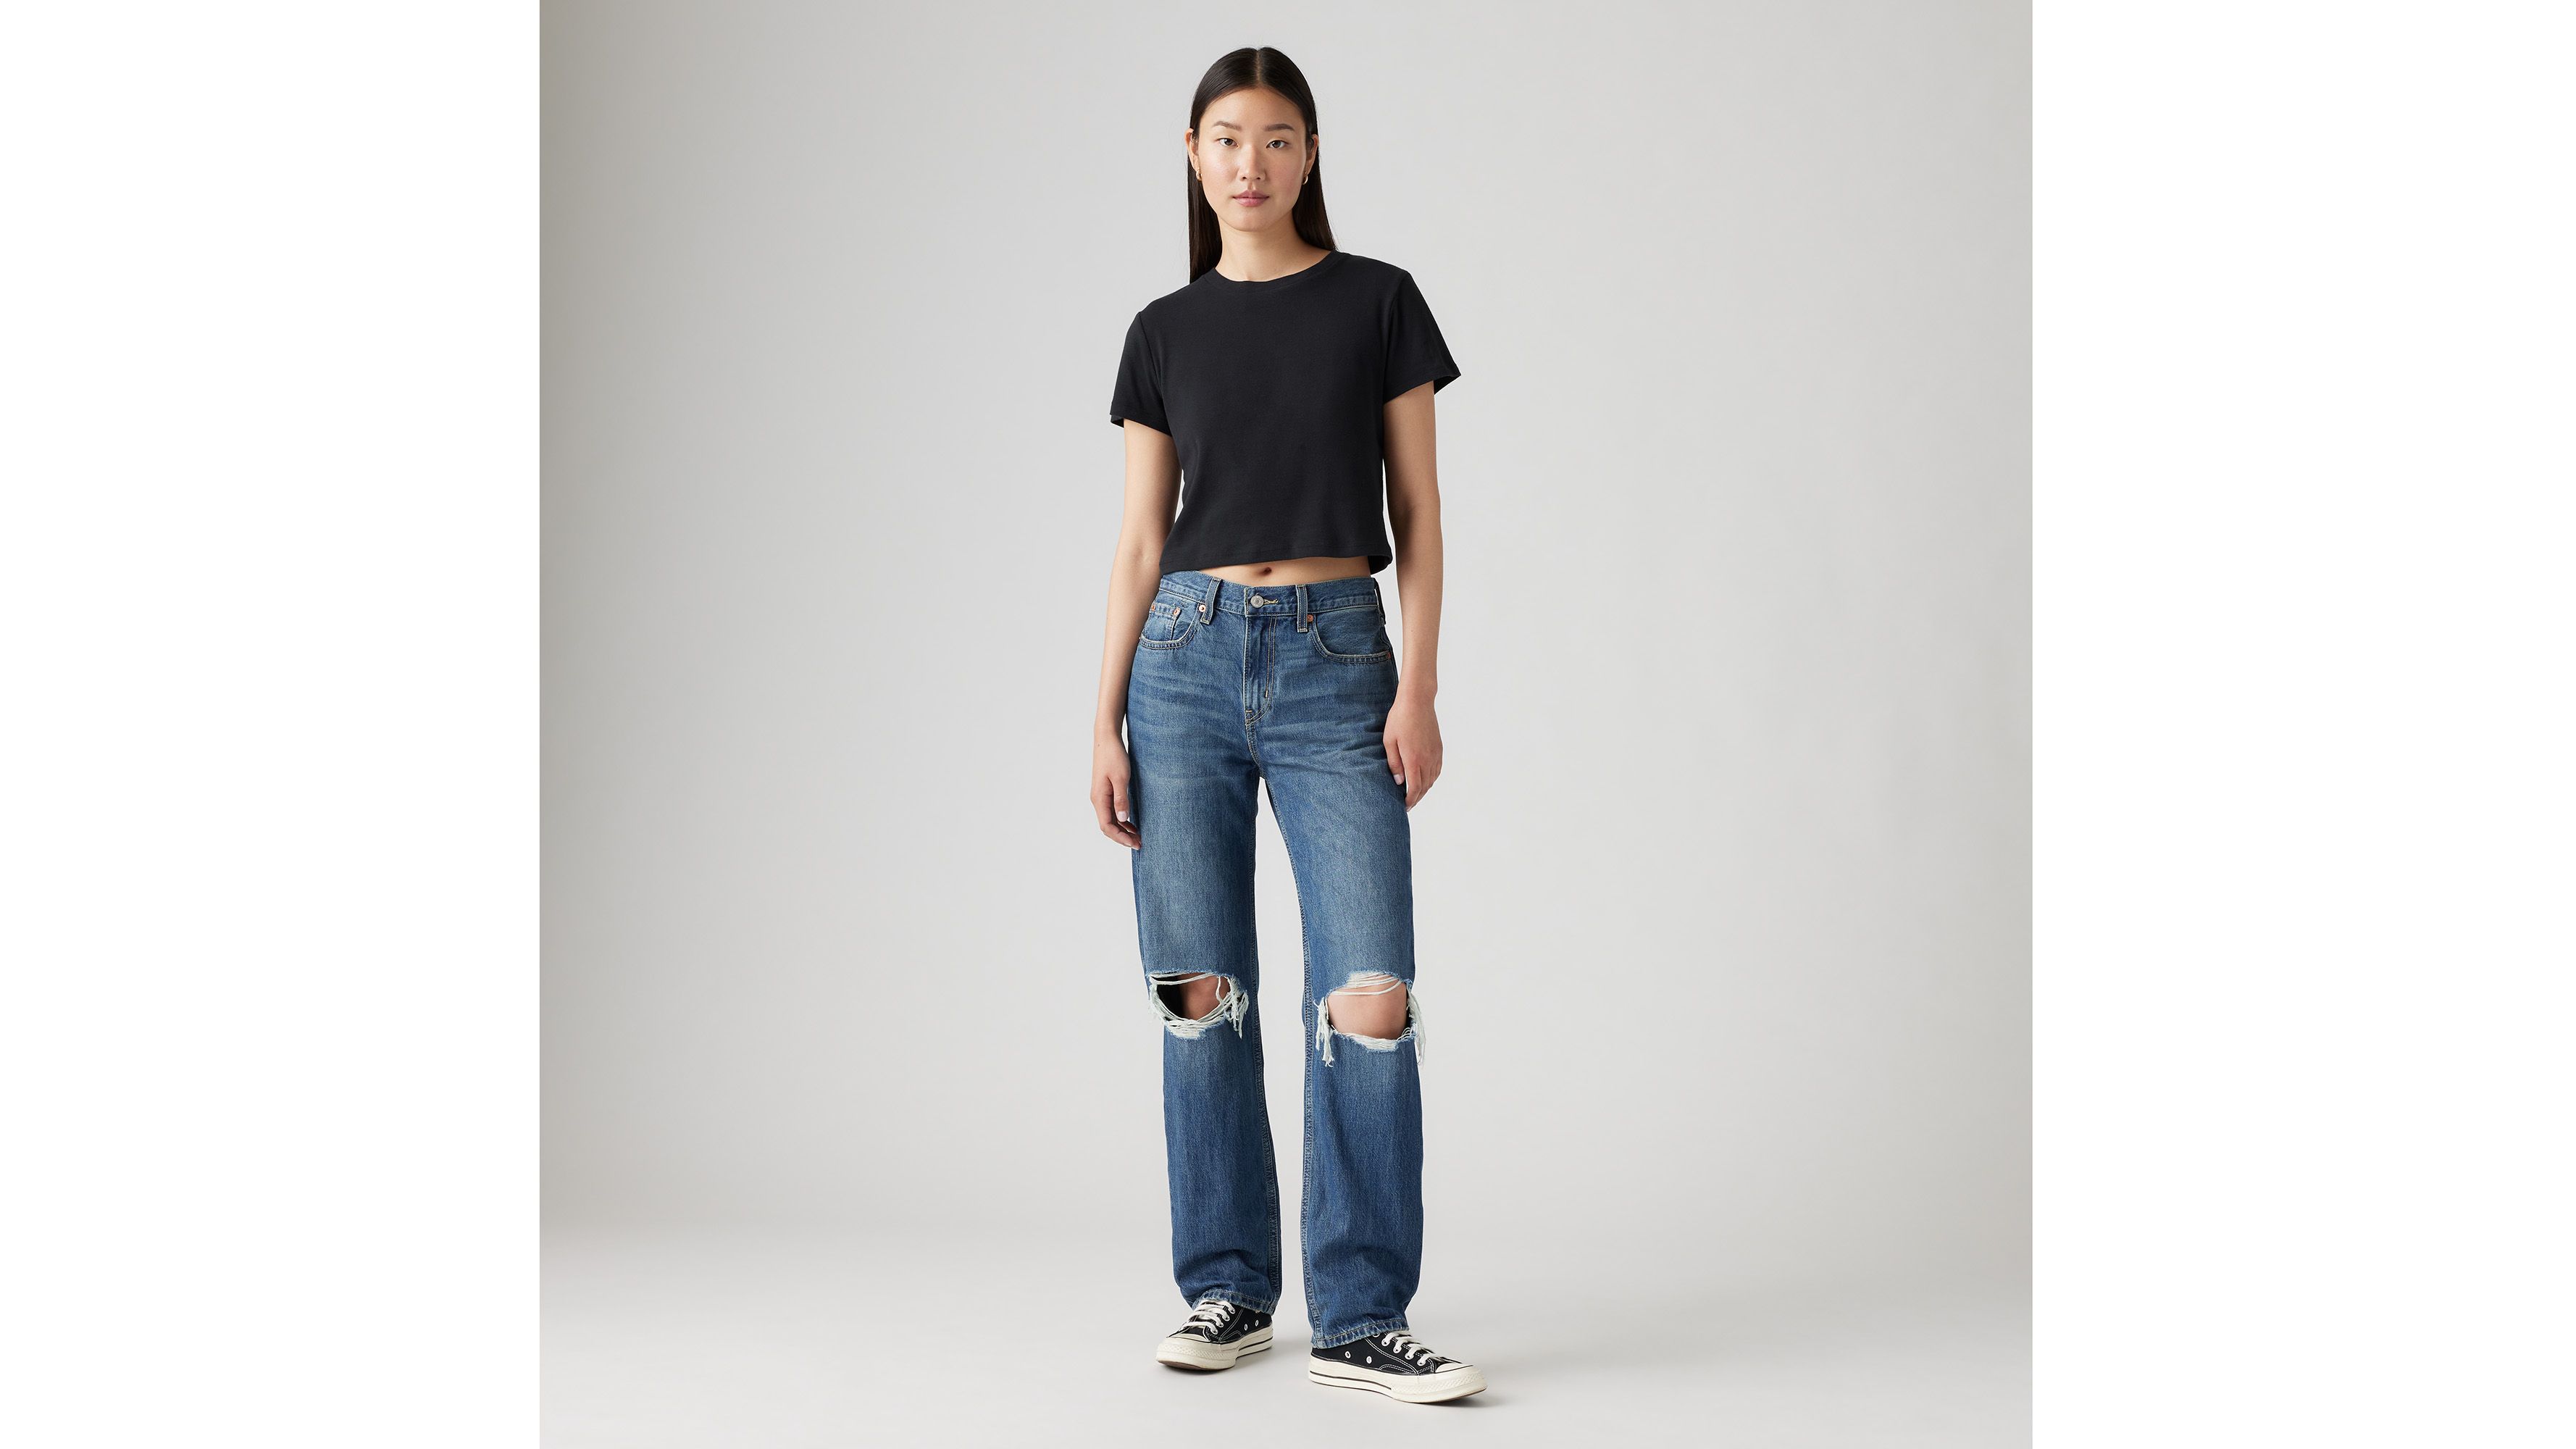 Fashionable long inseam Tall Women Jeans High Waist Solid Color